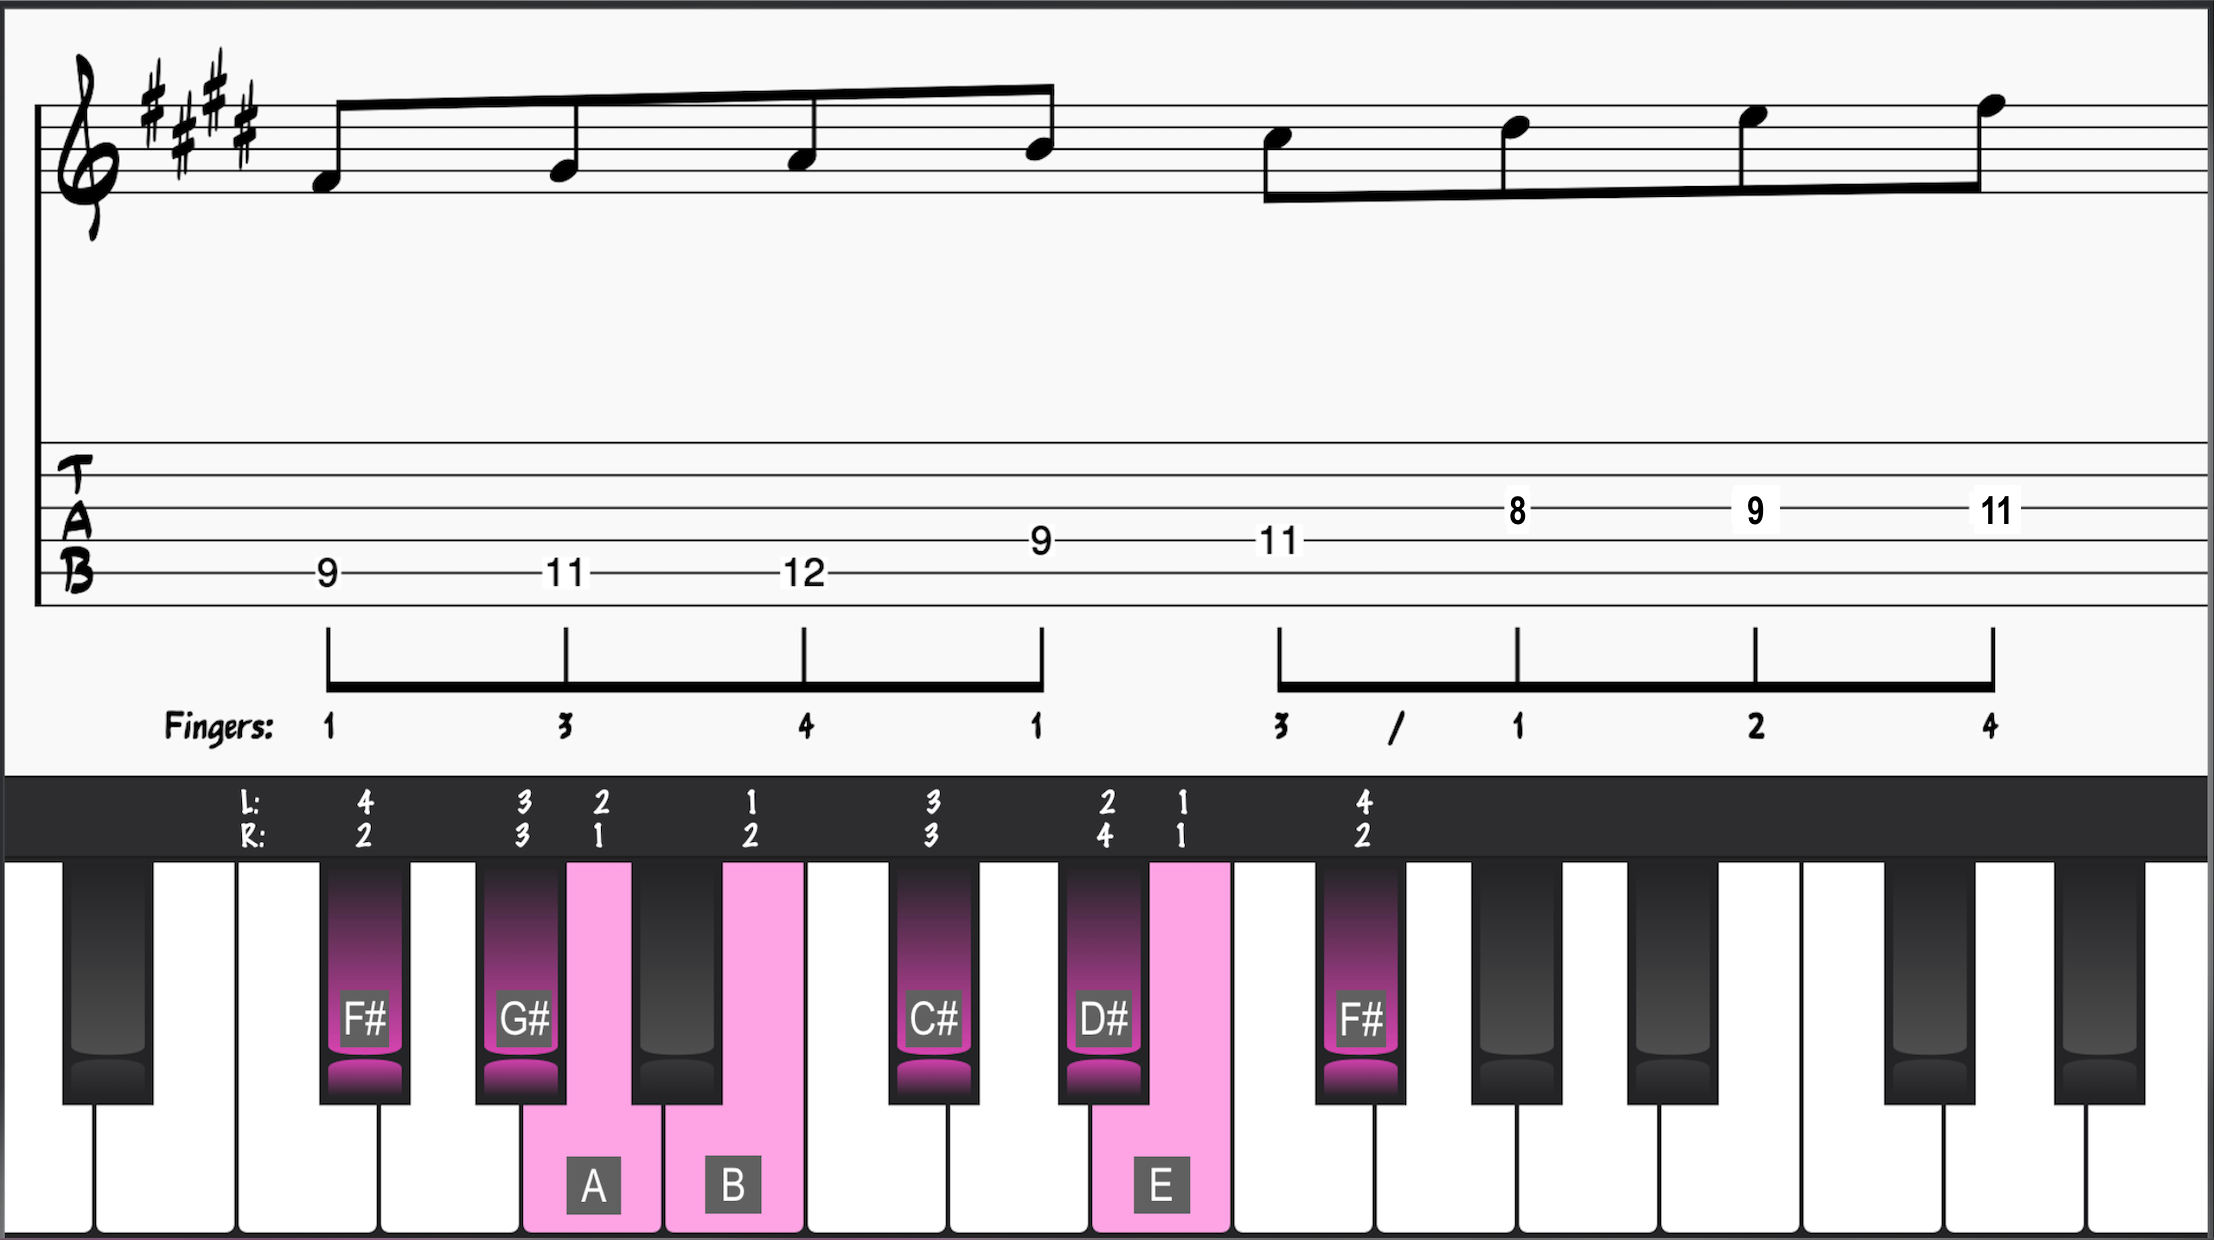 F# Dorian Mode with Guitar and Piano Fingerings